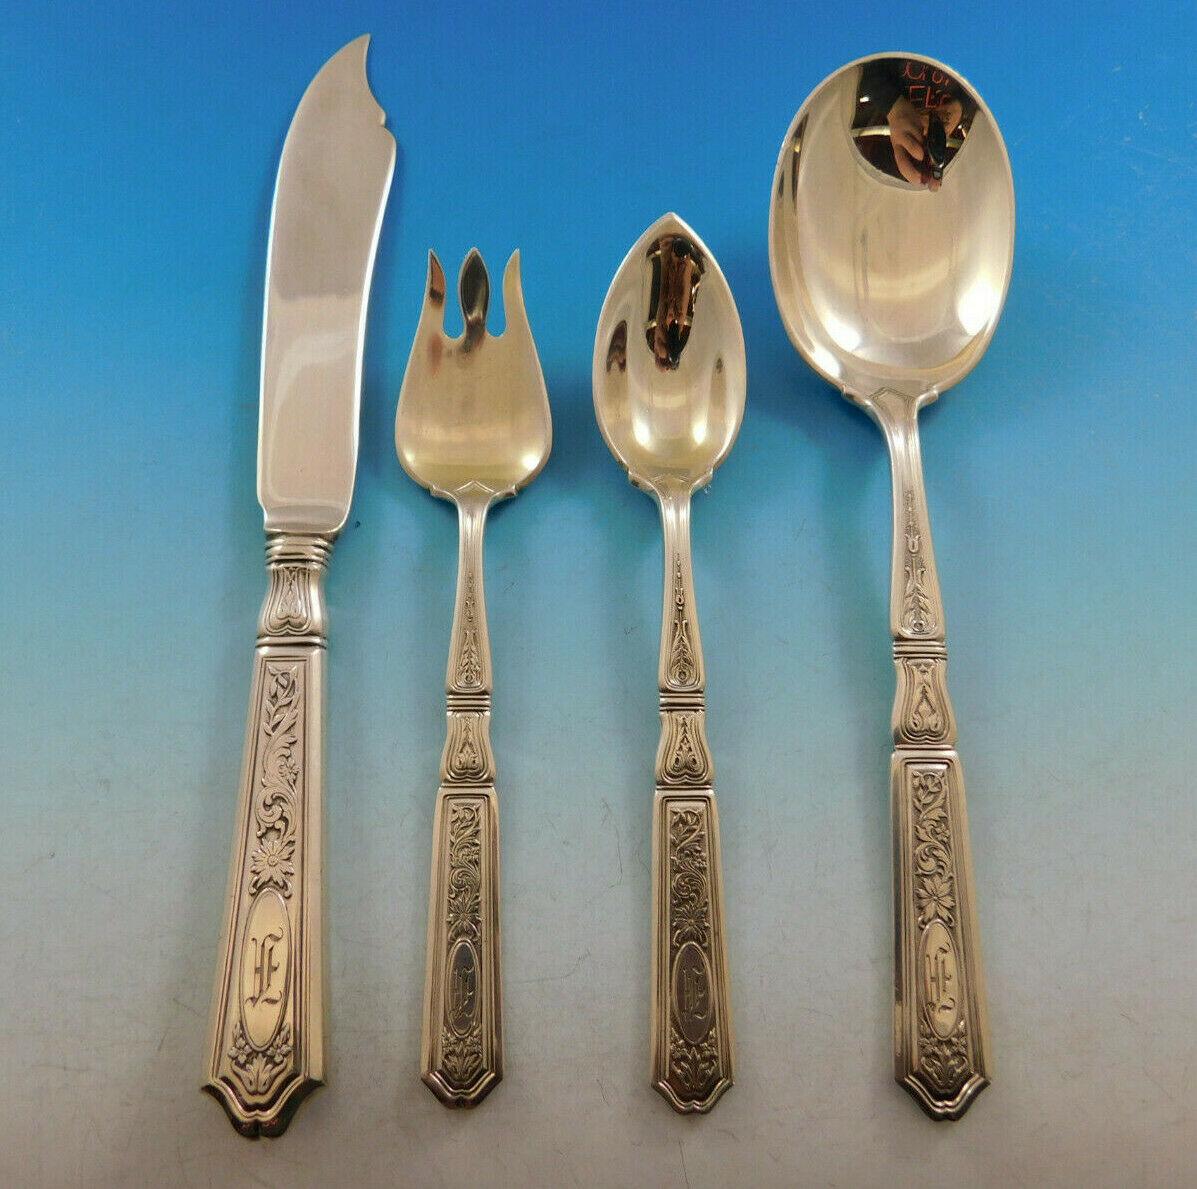 Monumental Saint Dunstan Chased by Gorham, circa 1917, sterling silver flatware set - 198 pieces. This set includes:

12 dinner size knives, 9 3/4